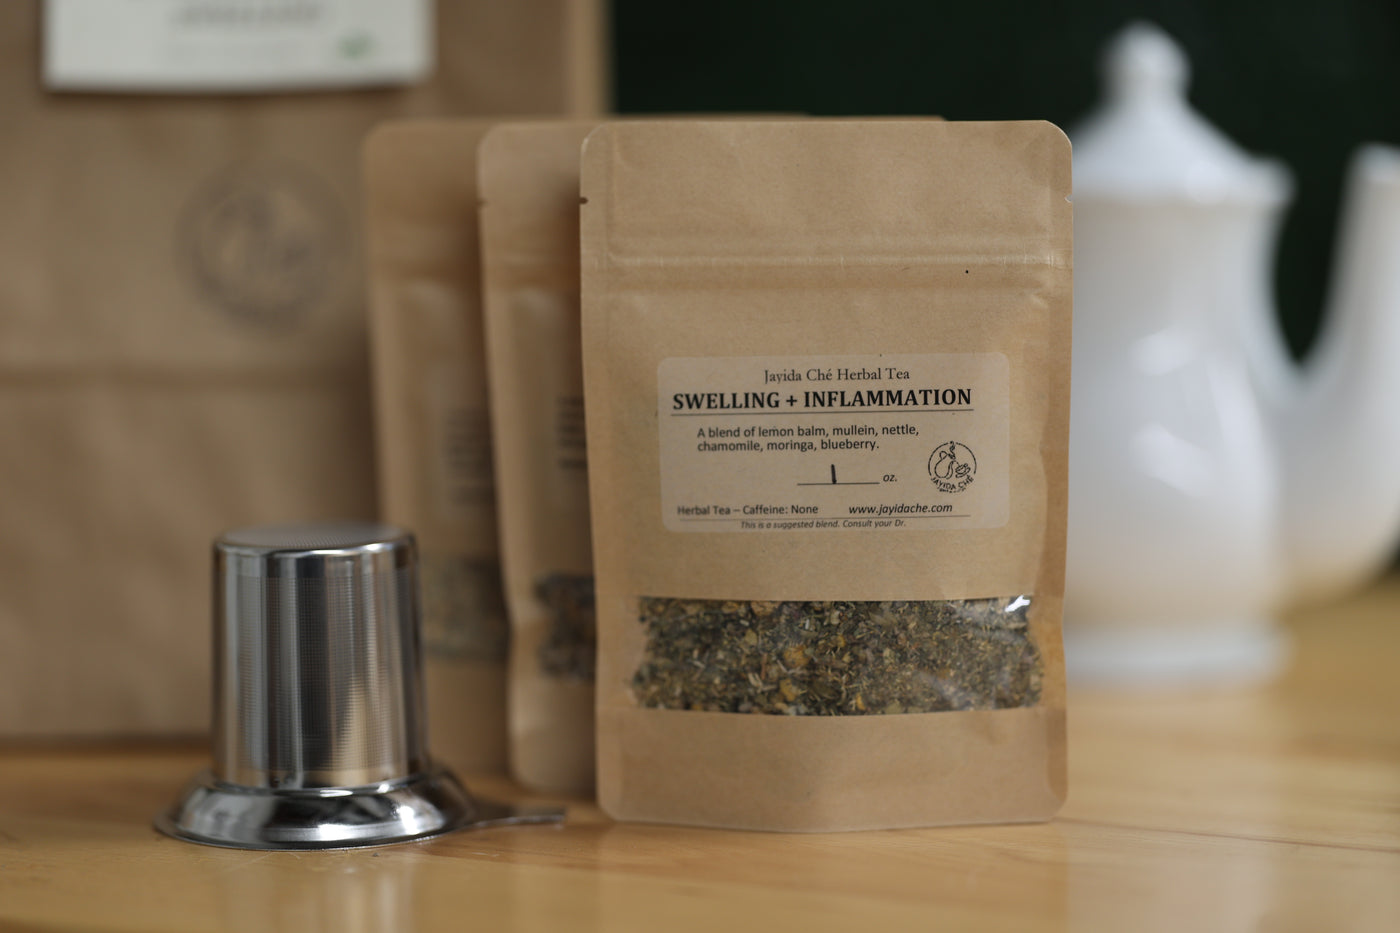 Inflammation-Reducing and Swelling-Relief Tea Bundle